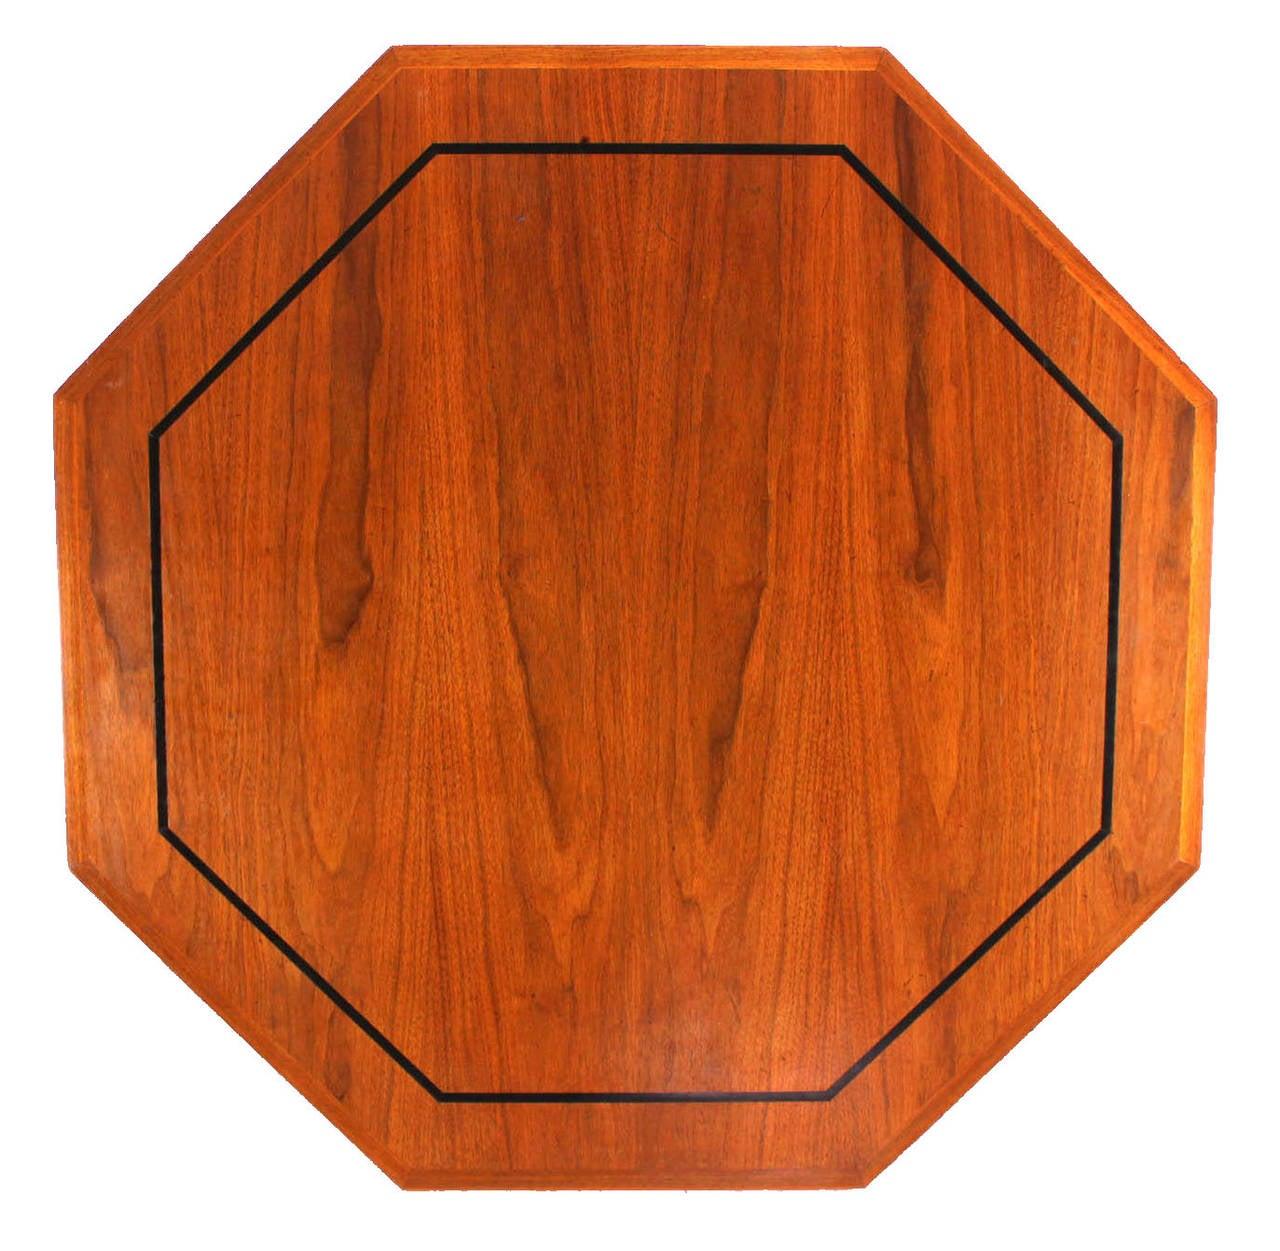 Lacquered Mid Century Modern Walnut X Base Inlayed Octagon Shape Coffee Table MINT! For Sale